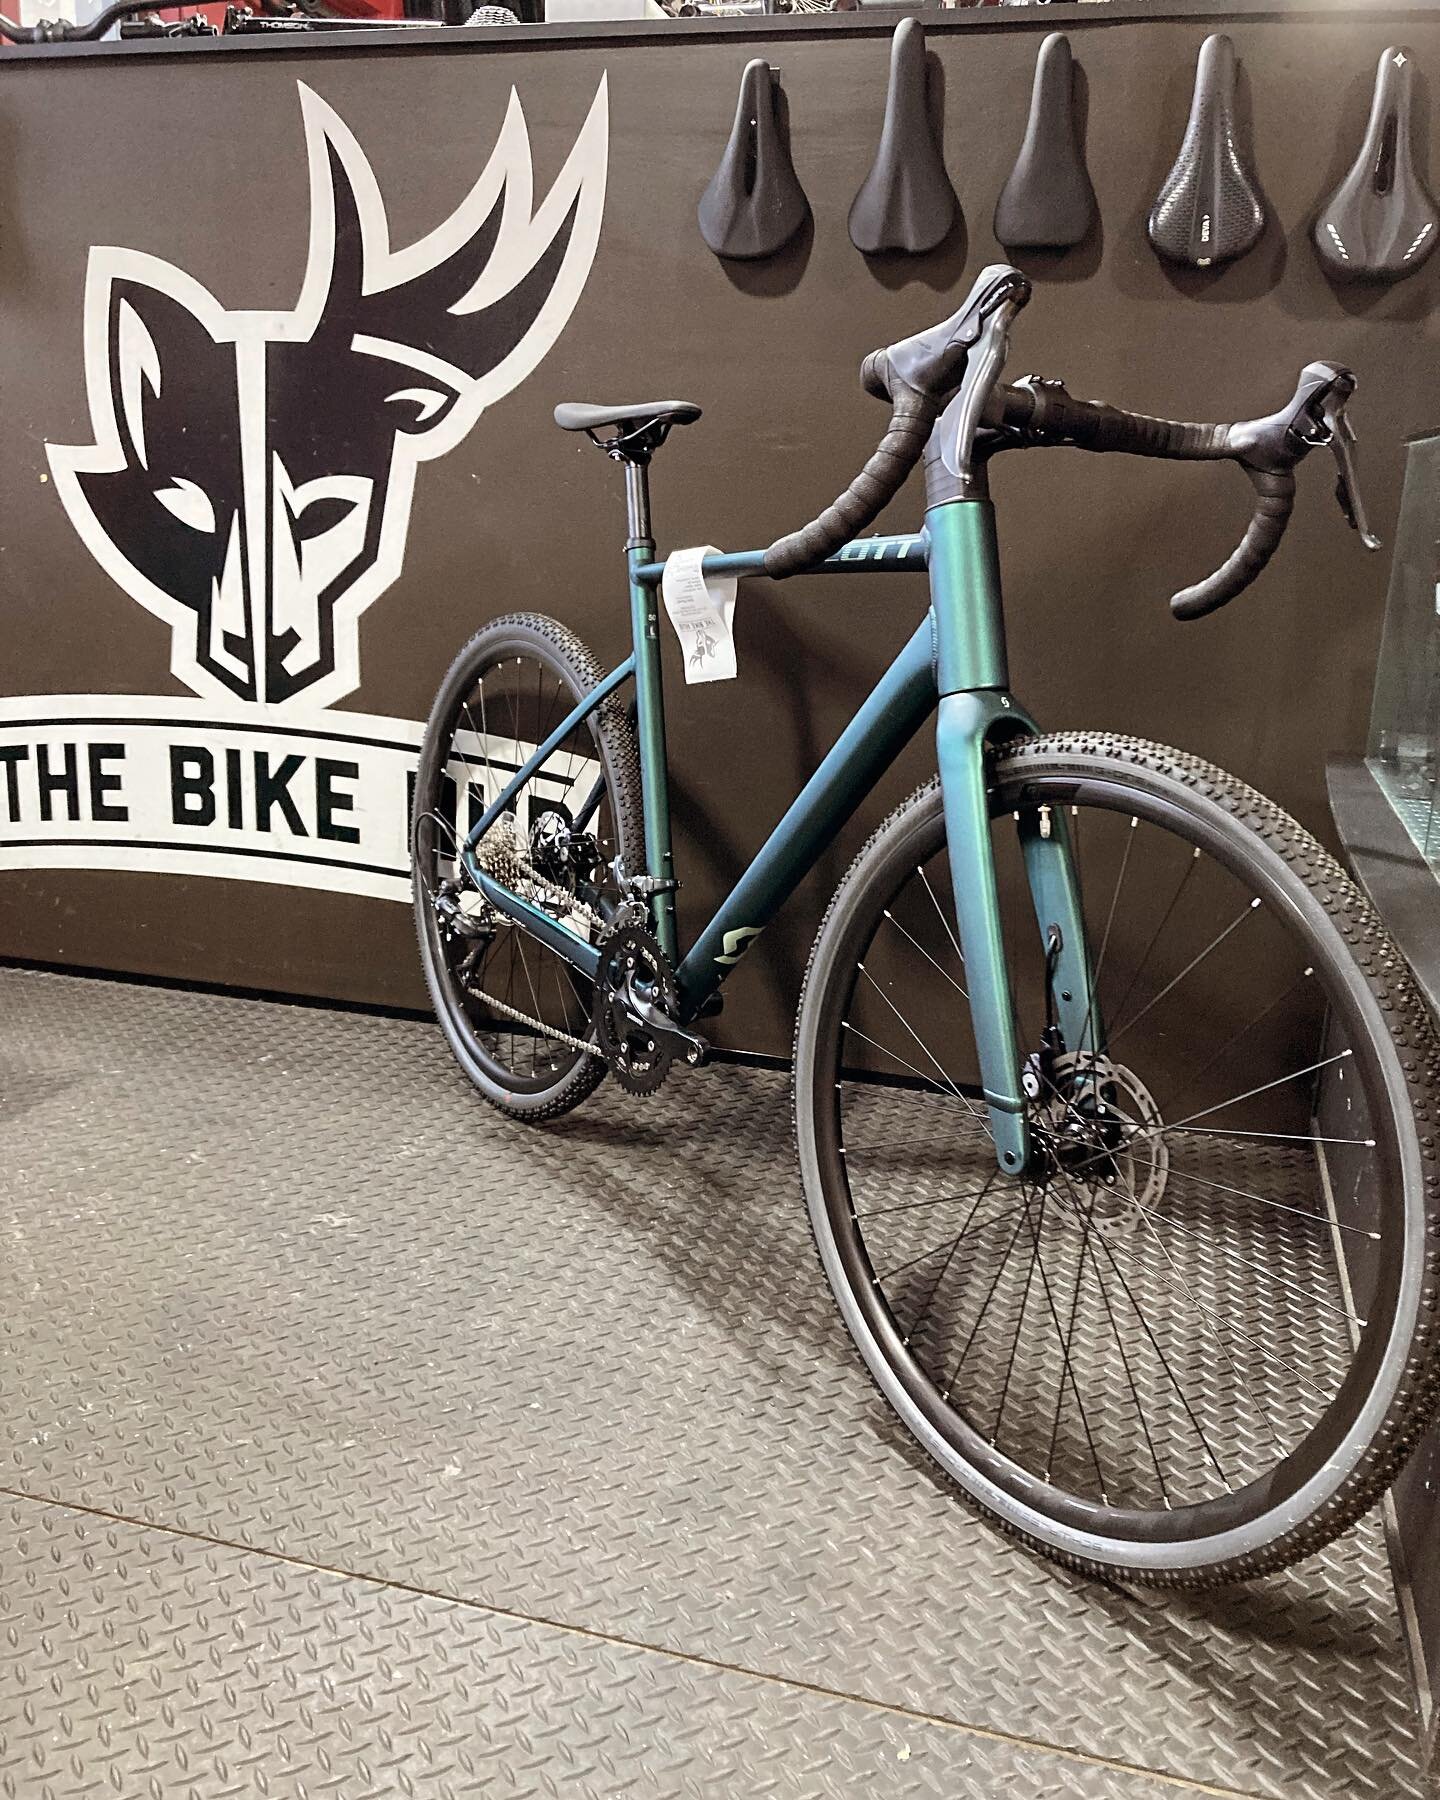 This @bikeonscott Speedster Gravel Bike is rolling home today!  Gravel bikes are the most ideal and versatile set up for long distance rides. With a wider range of tire options as well as a slacker geo spec - all adds up to a more comfortable positio